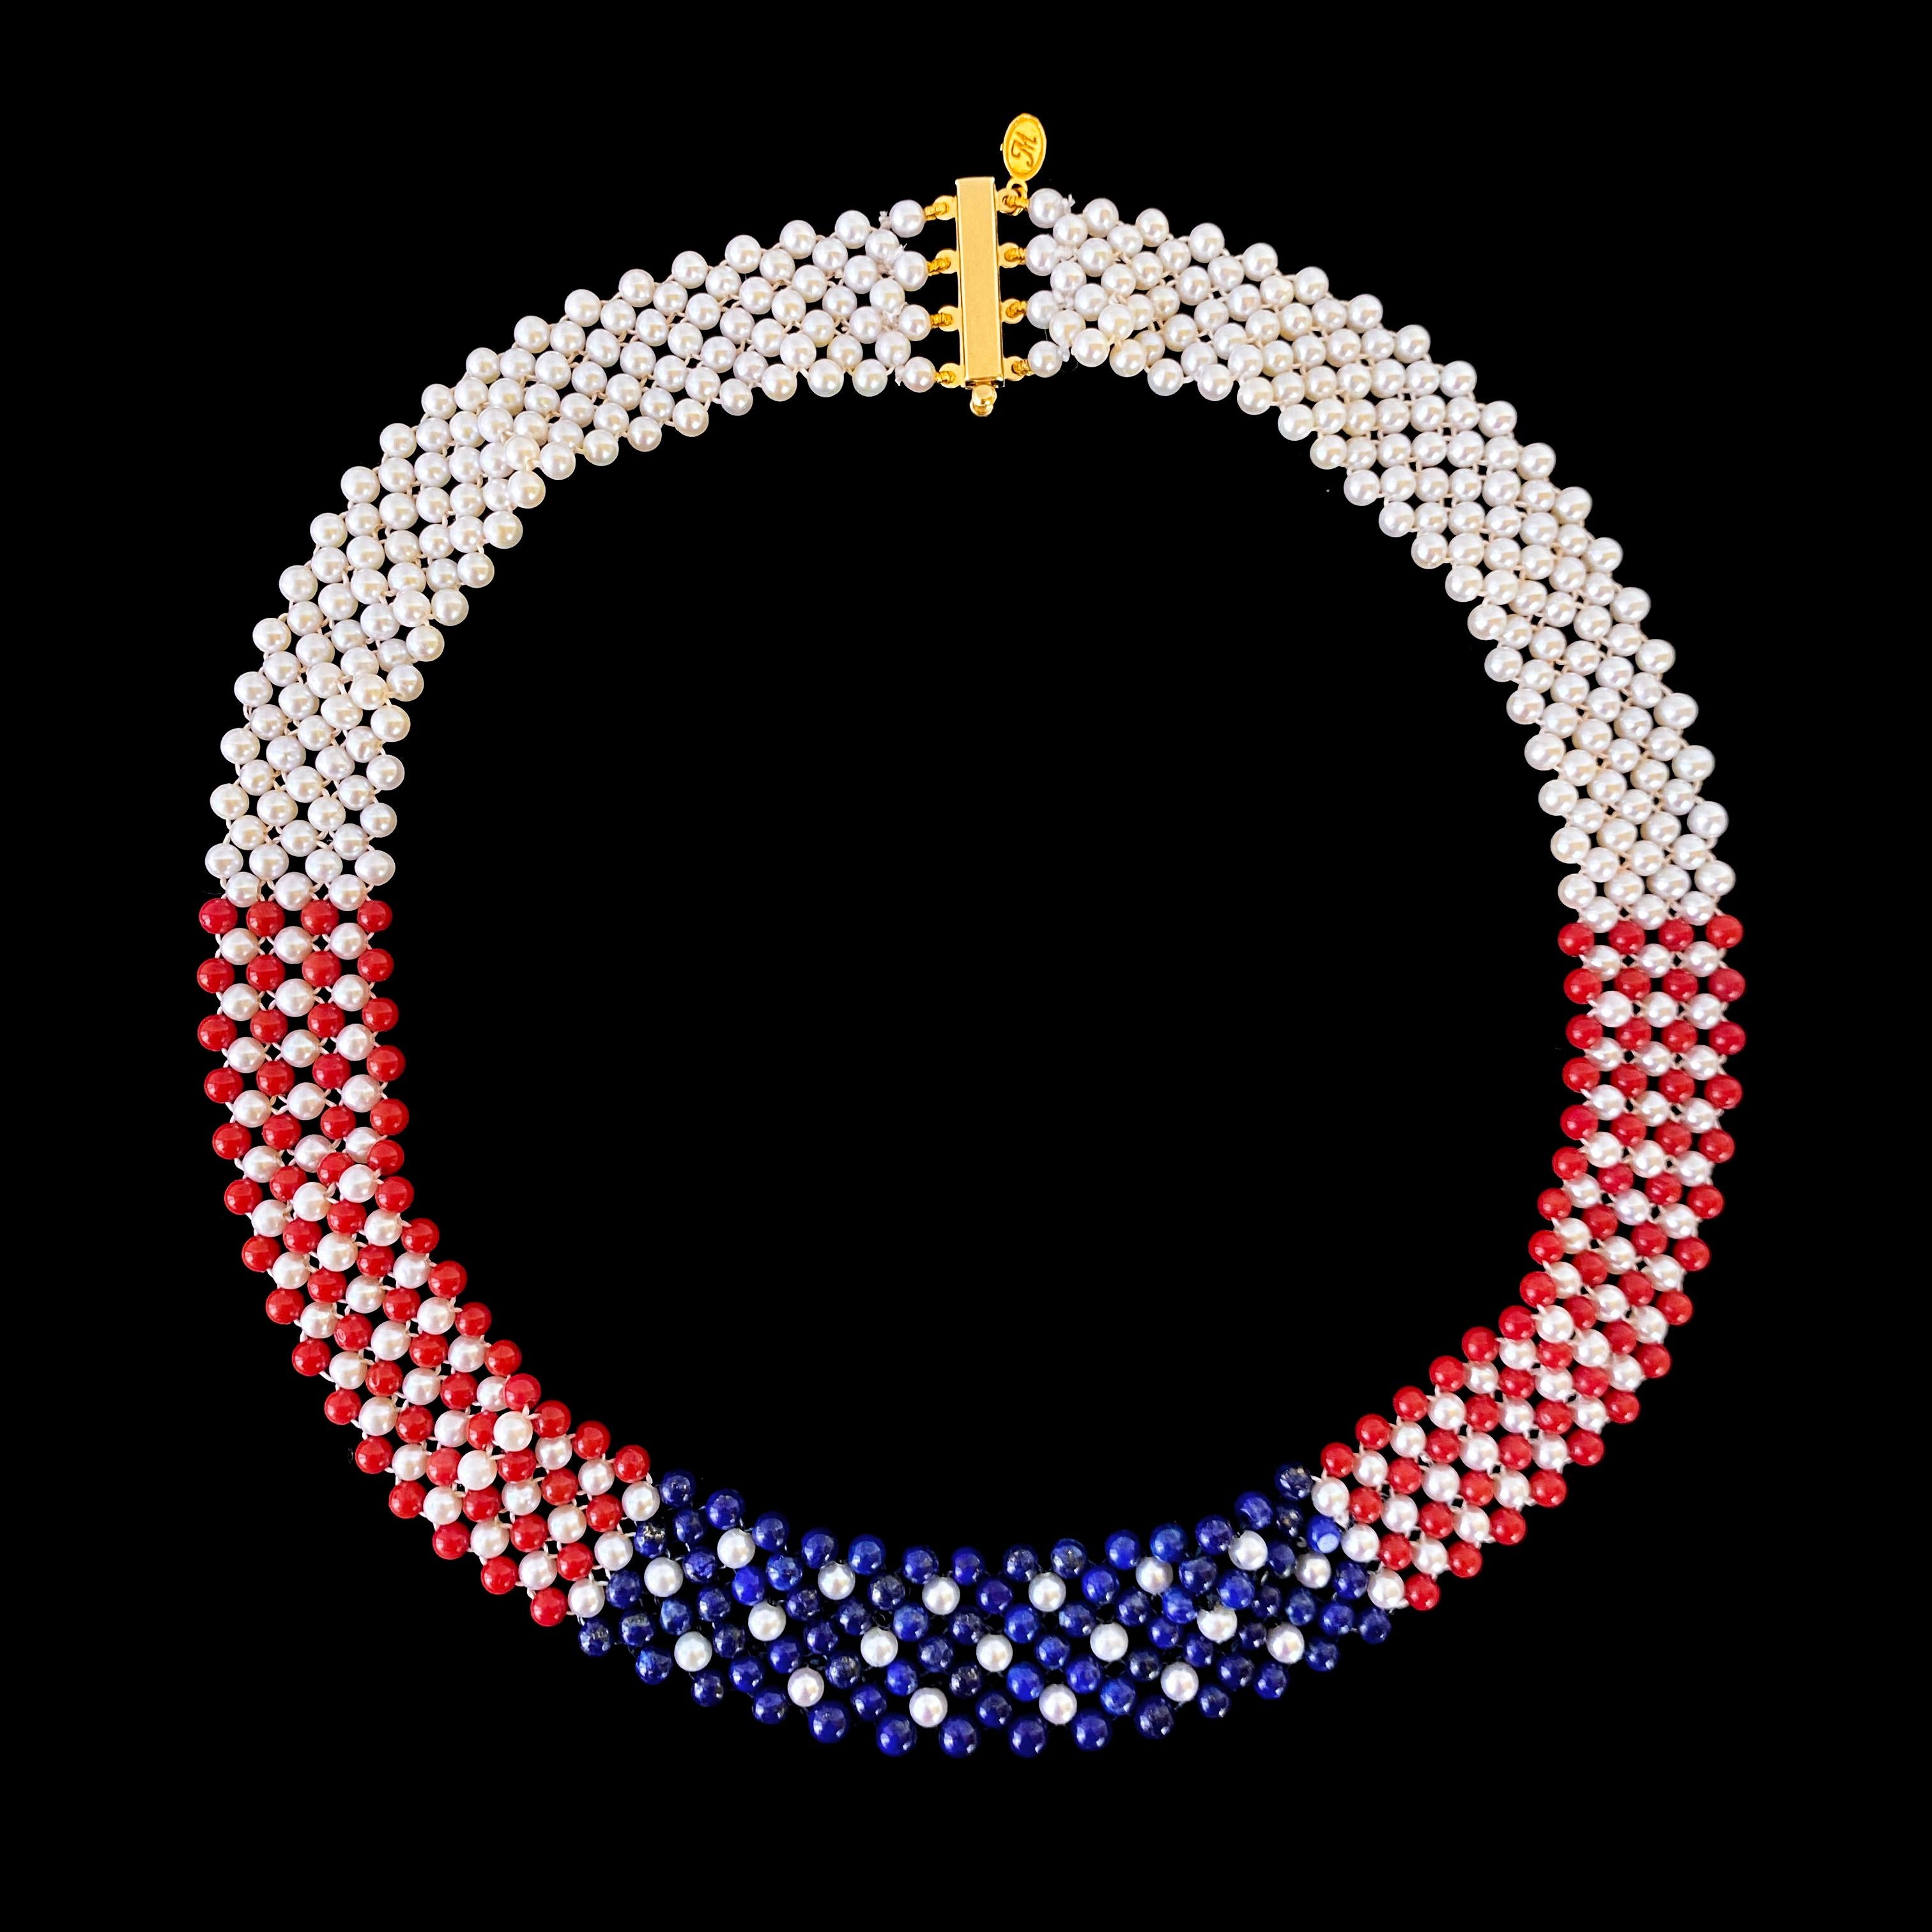 Marina J. Woven Pearl, Coral, & Lapis American Flag Necklace with 14K Gold For Sale 3